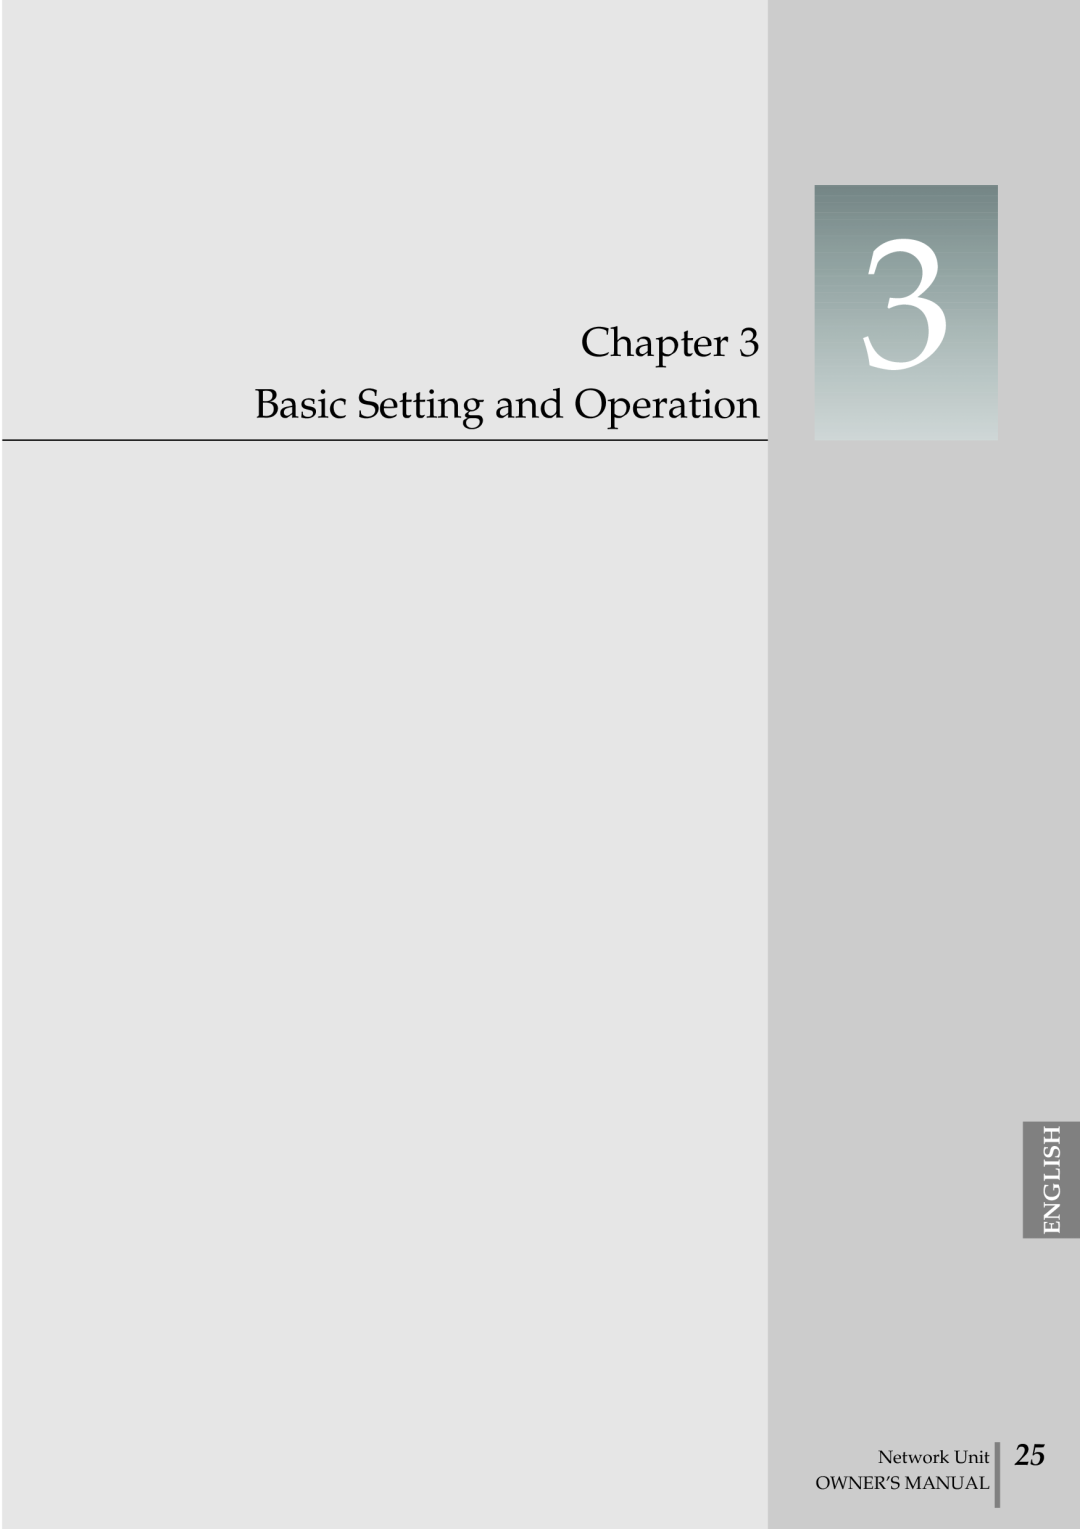 Eiki PjNET-20 owner manual Basic Setting and Operation, Chapter, English, Network Unit OWNER’S MANUAL 